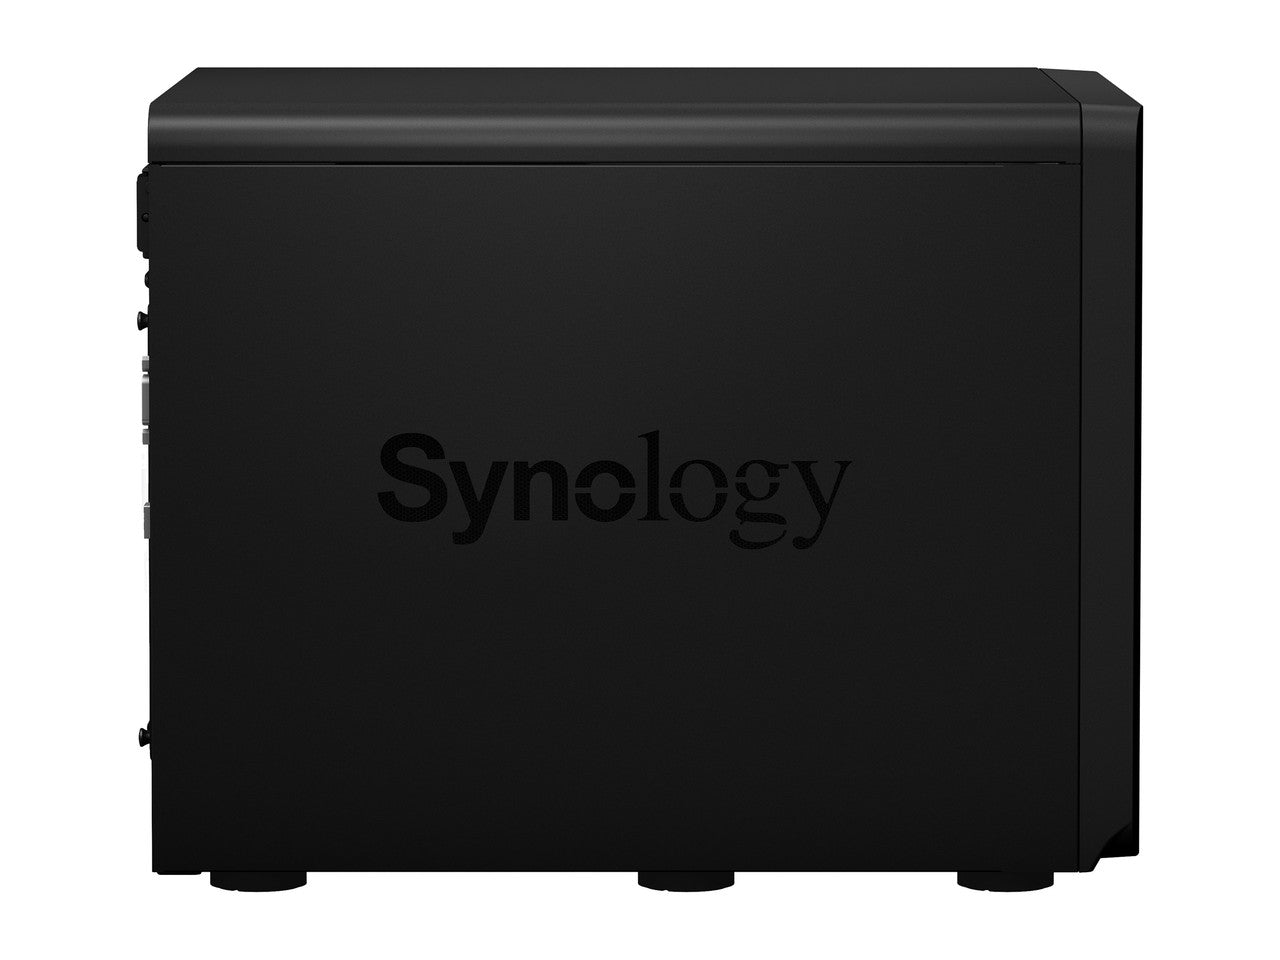 Synology DS2422+ Quad Core 2.2Ghz 12-Bay NAS with E10M20 10GbE Port and 1.6TB (2x800GB) CACHE, 16GB RAM and 144TB (12 x 12TB) of Synology Enterprise Drives